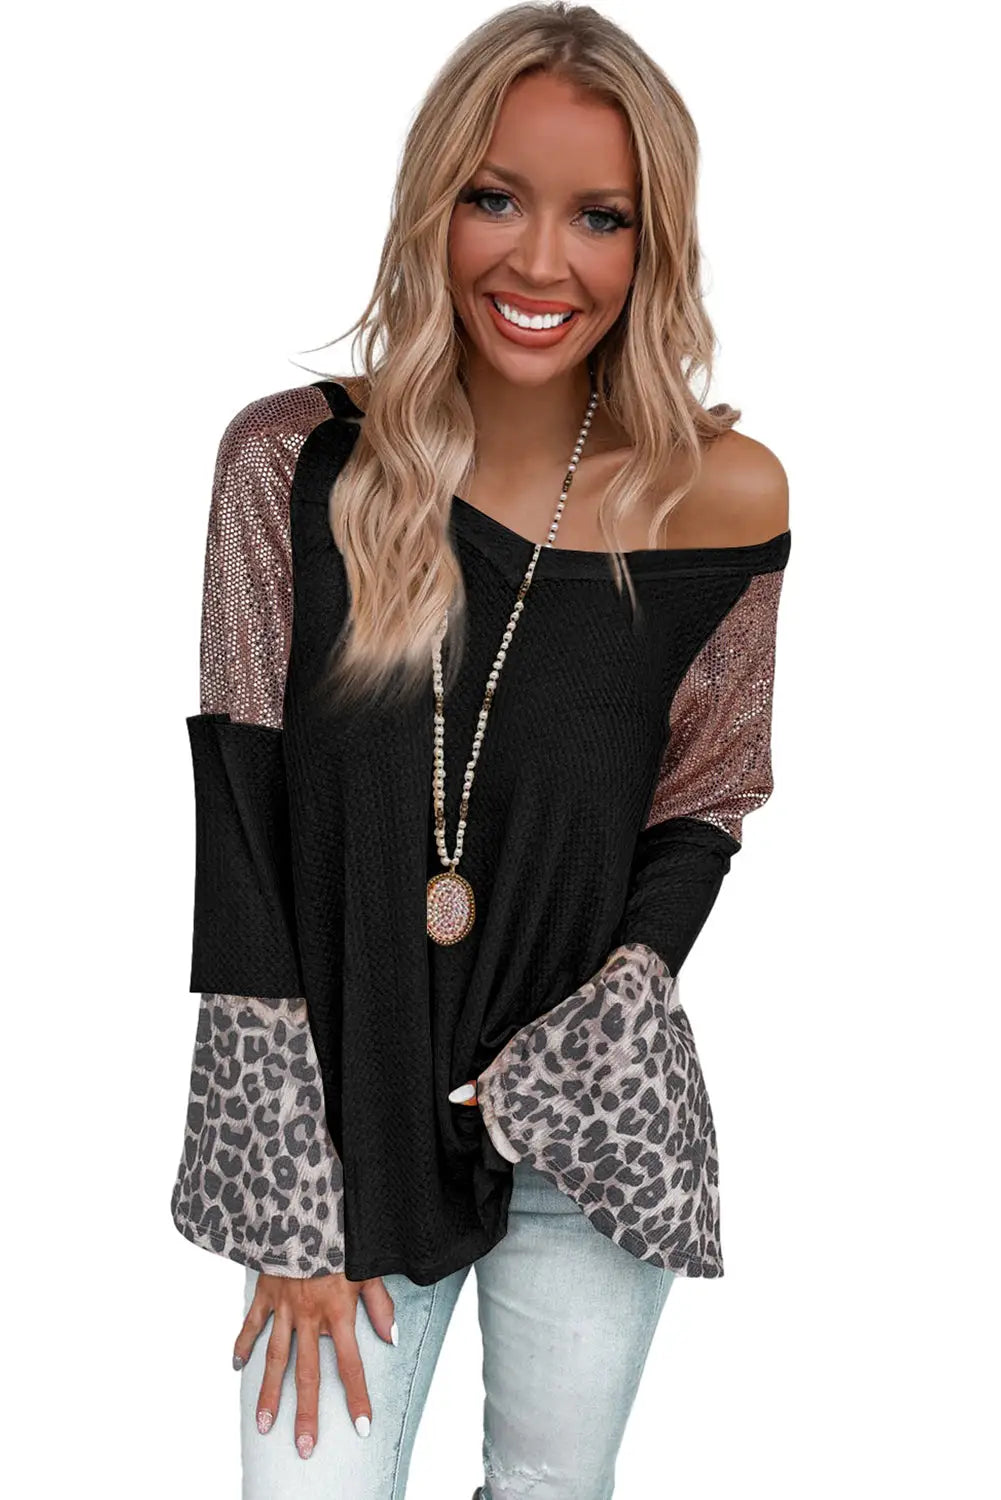 Black sequin patchwork bell sleeve v neck tunic top - tops